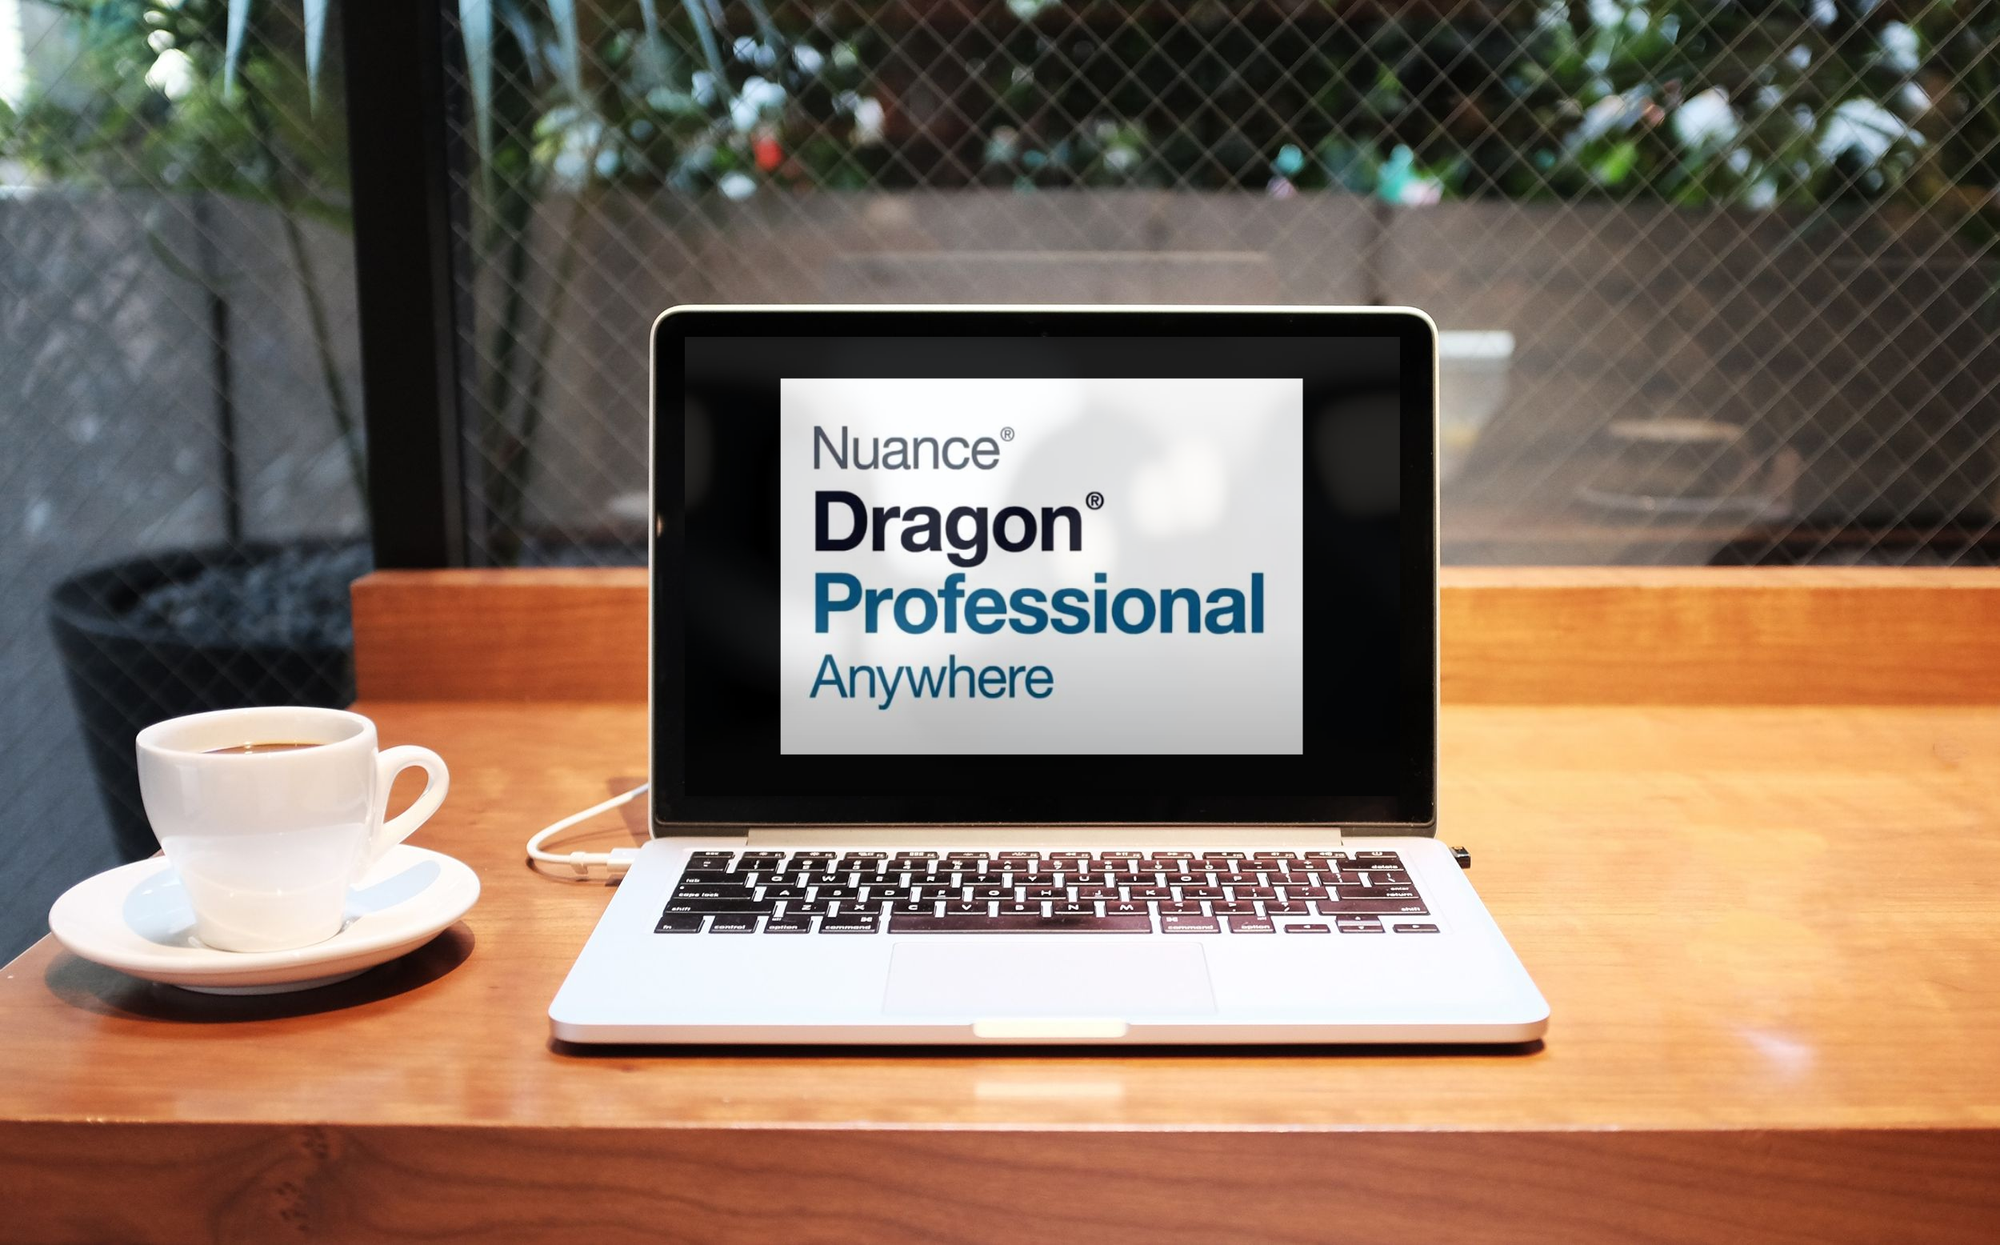 Nuance streaming Dragon Professional Anywhere